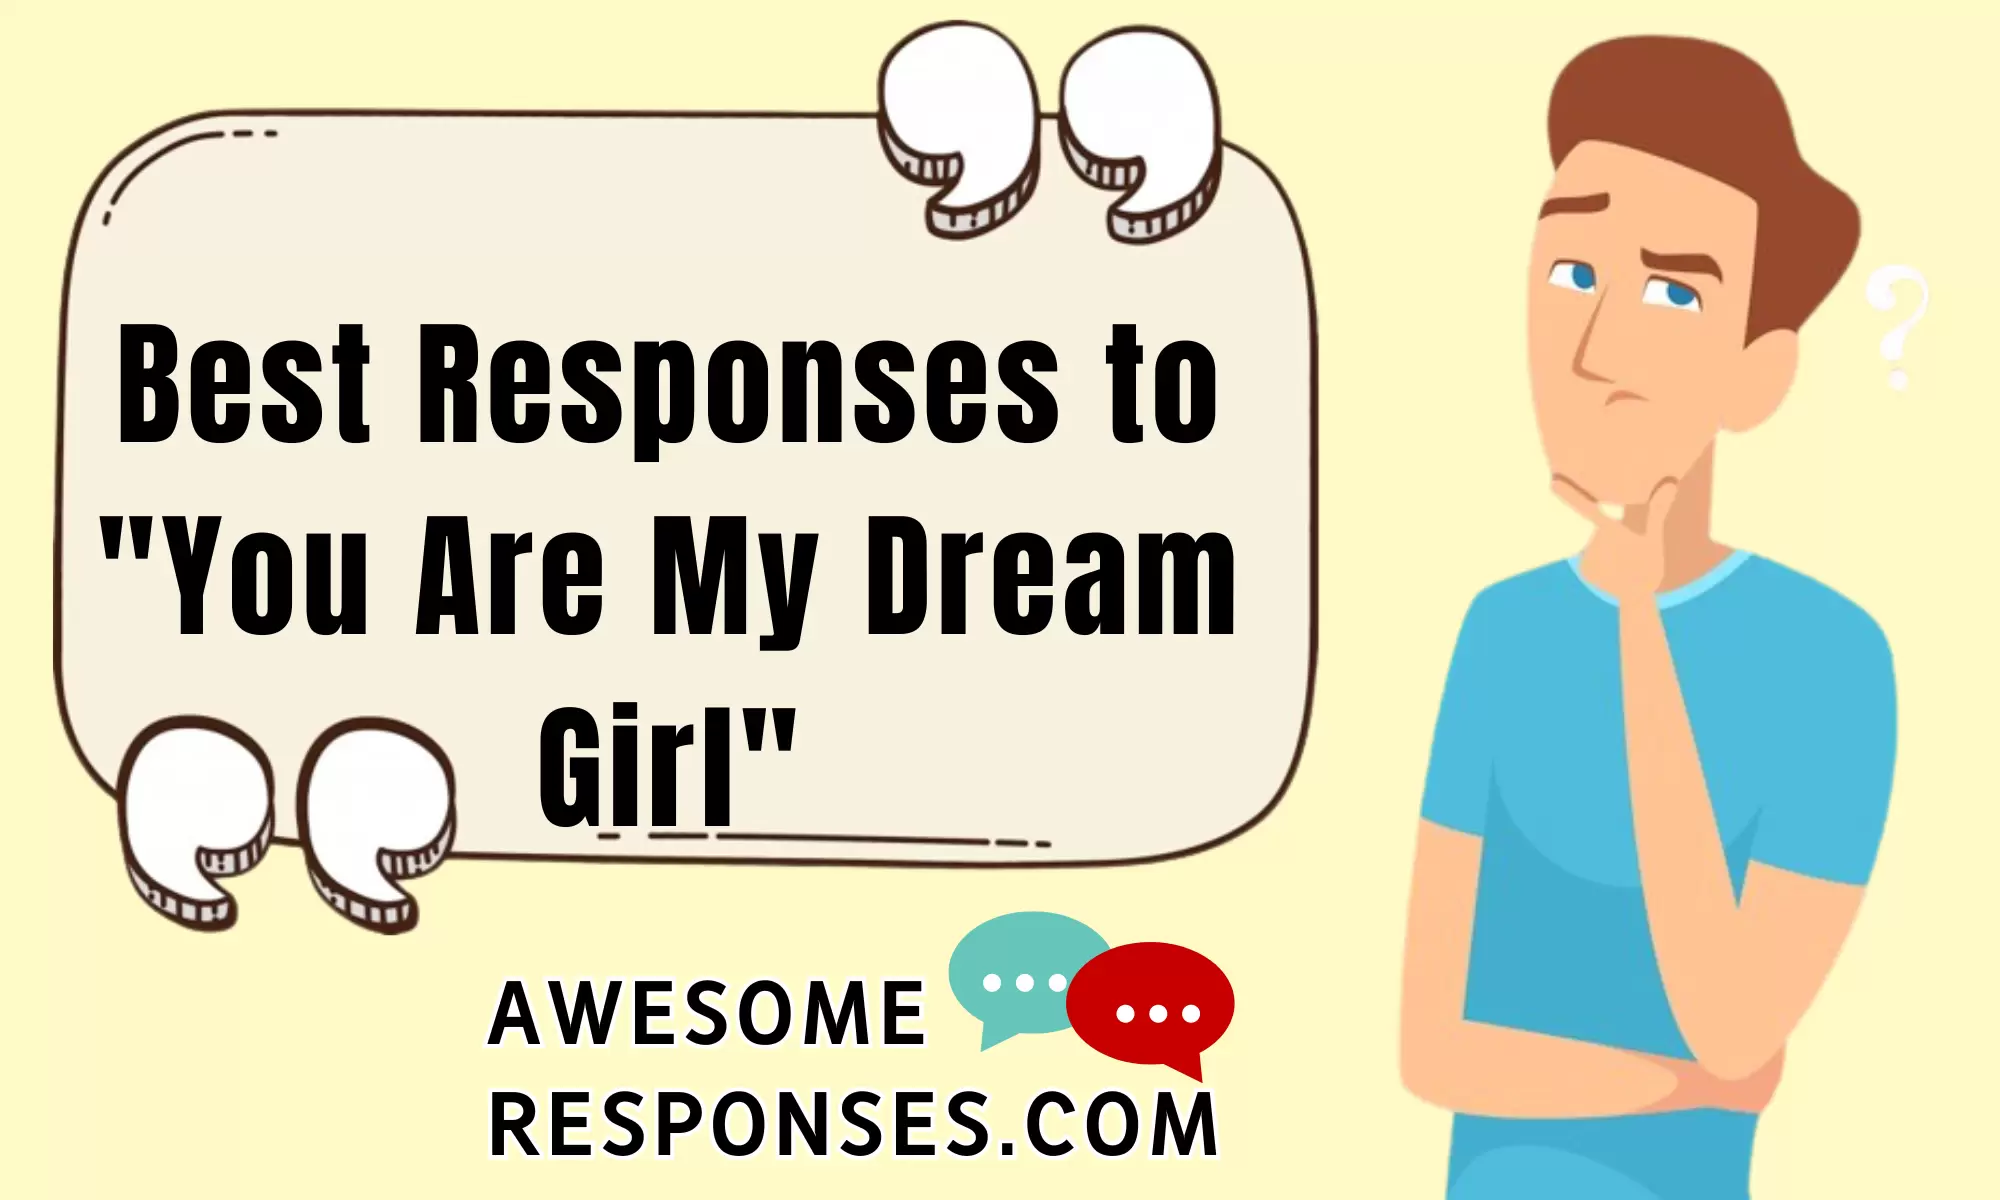 Best Responses to "You Are My Dream Girl"